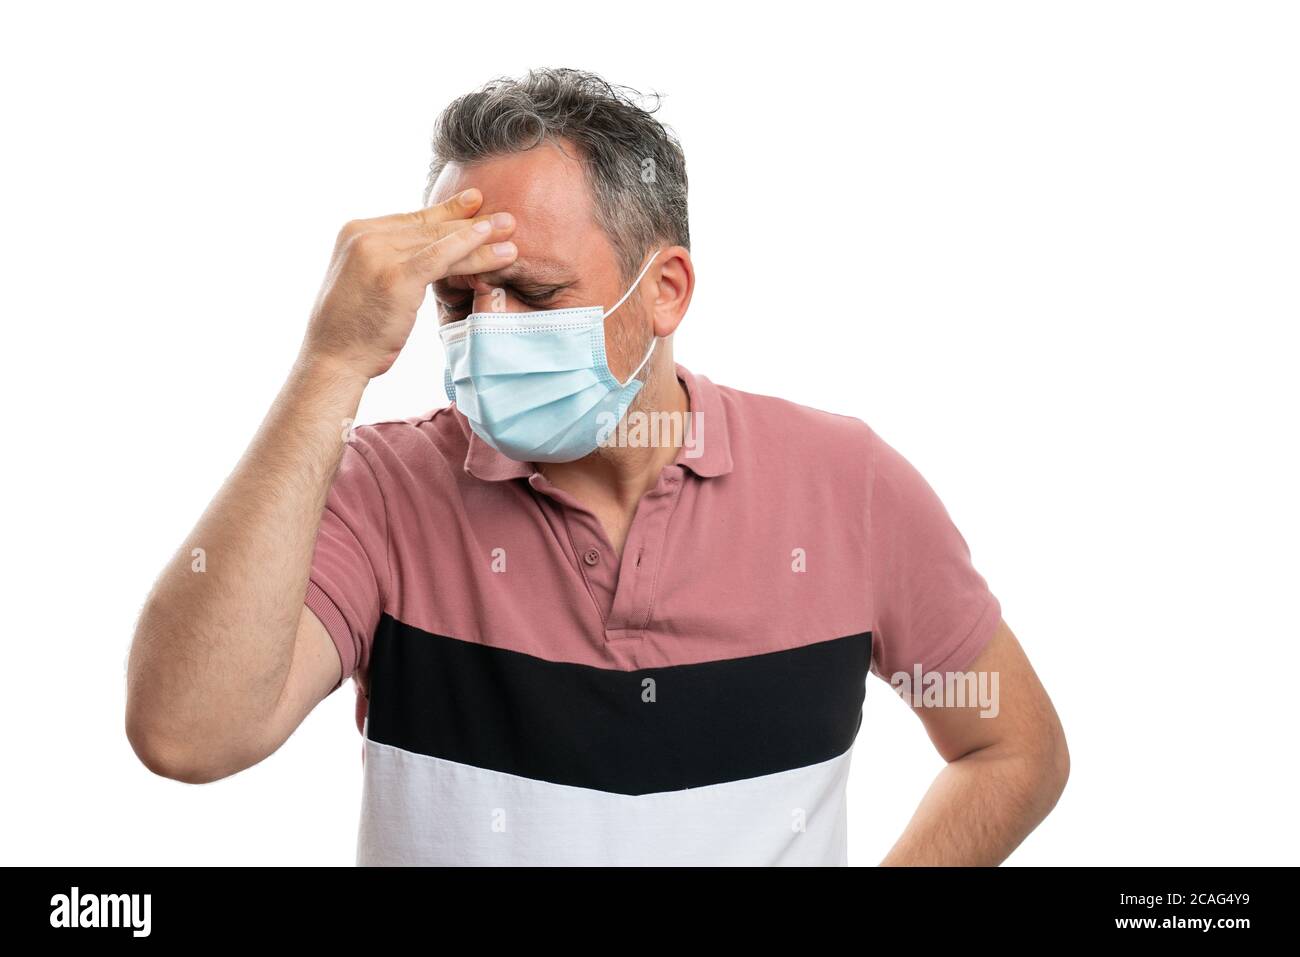 Adult man touching forehead with hand as migraine covid19 flu influenza symptom concept wearing surgical mask isolated on white background Stock Photo